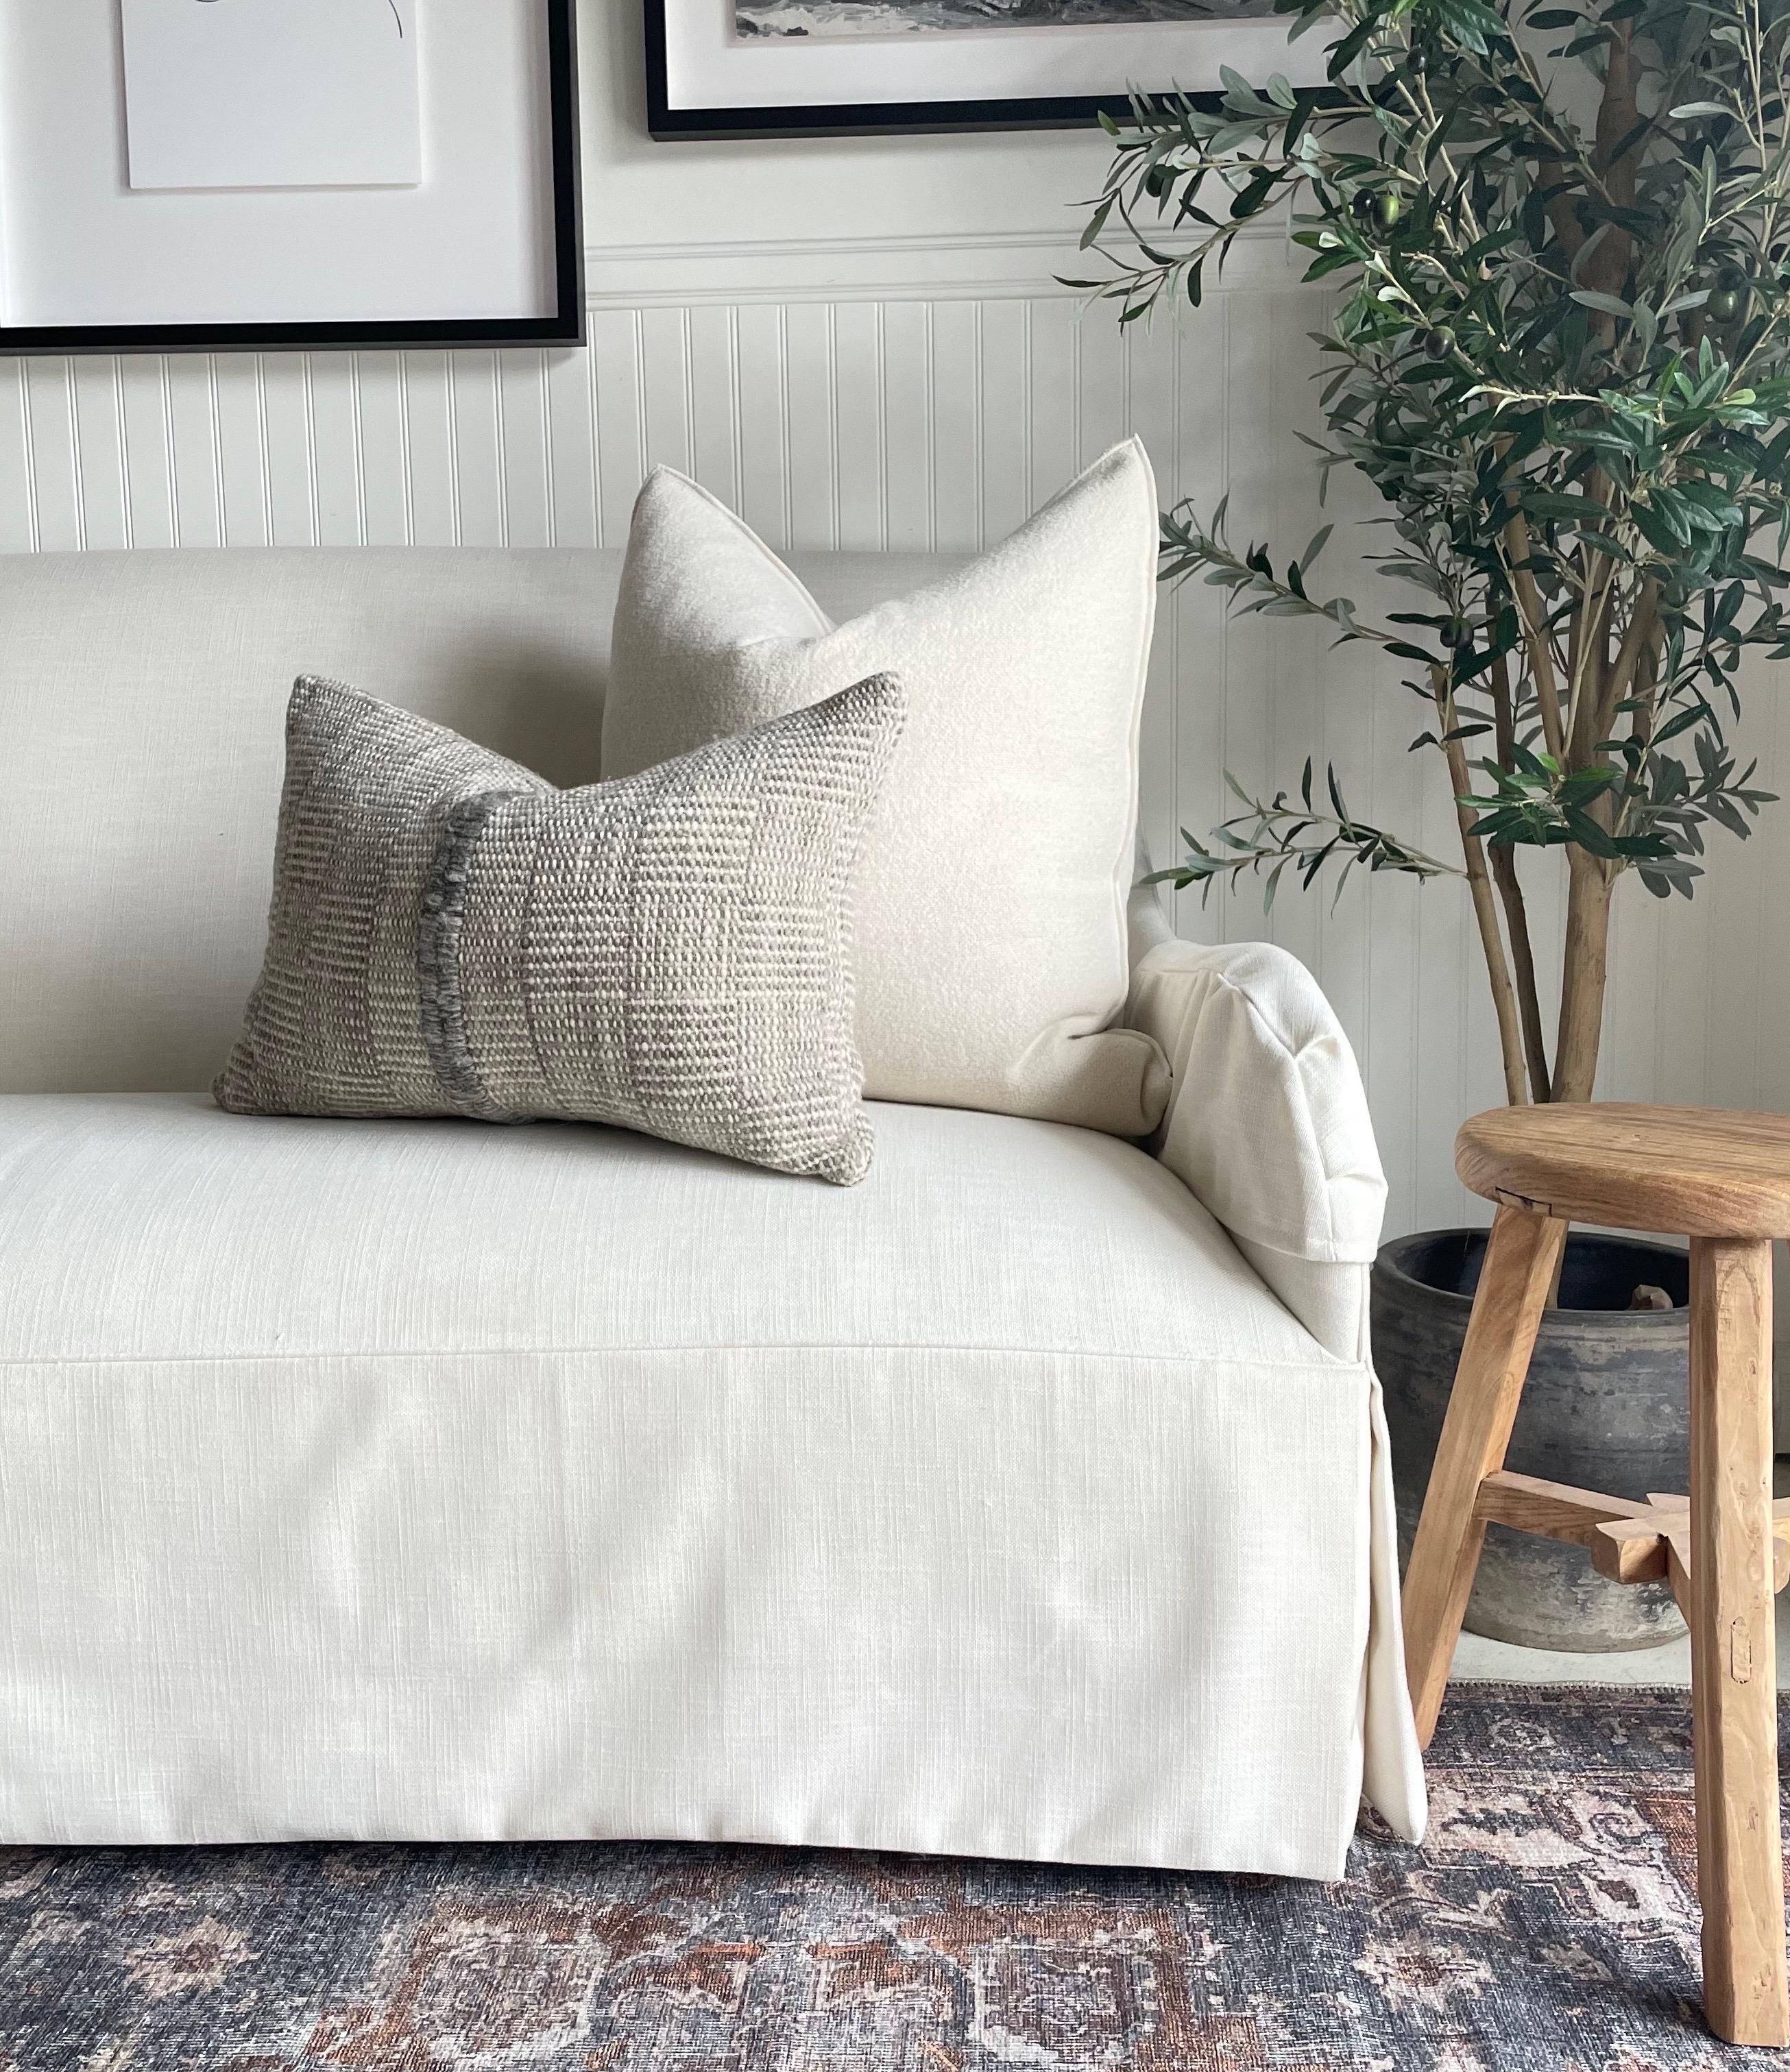 ustom wool blend accent pillow with down insert Color: Blanc, a nubby boucle style pillow with a stitched edge, metal zipper closure. Our pillows are constructed with vintage one of a kind textiles from around the globe. Carefully constructed with